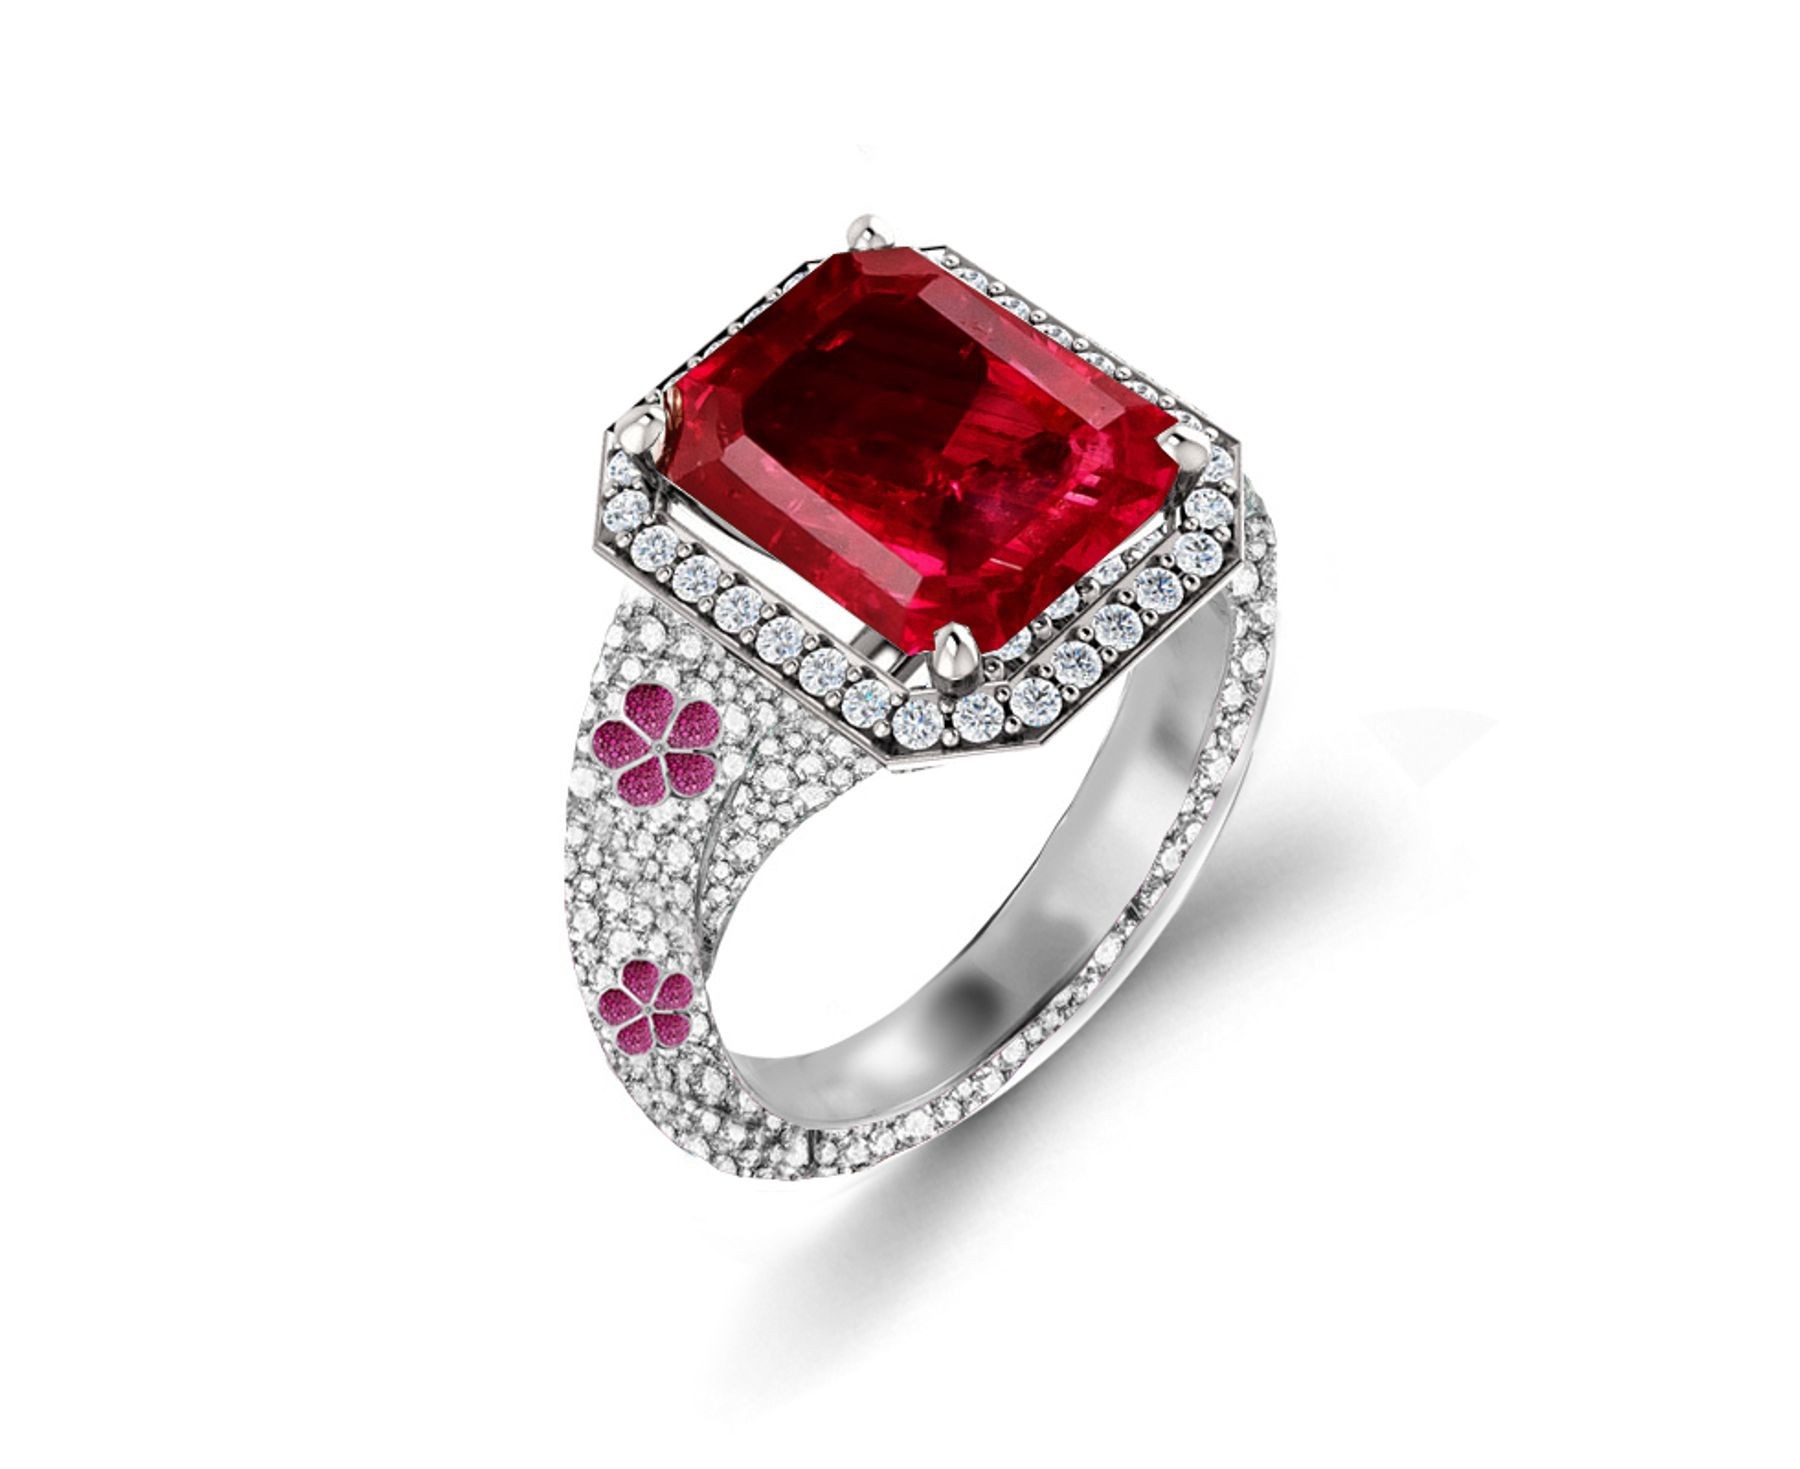 Delicate French Micro Pave Floral Rings Featuring Vivid Red Rubies & Sparkling Diamonds